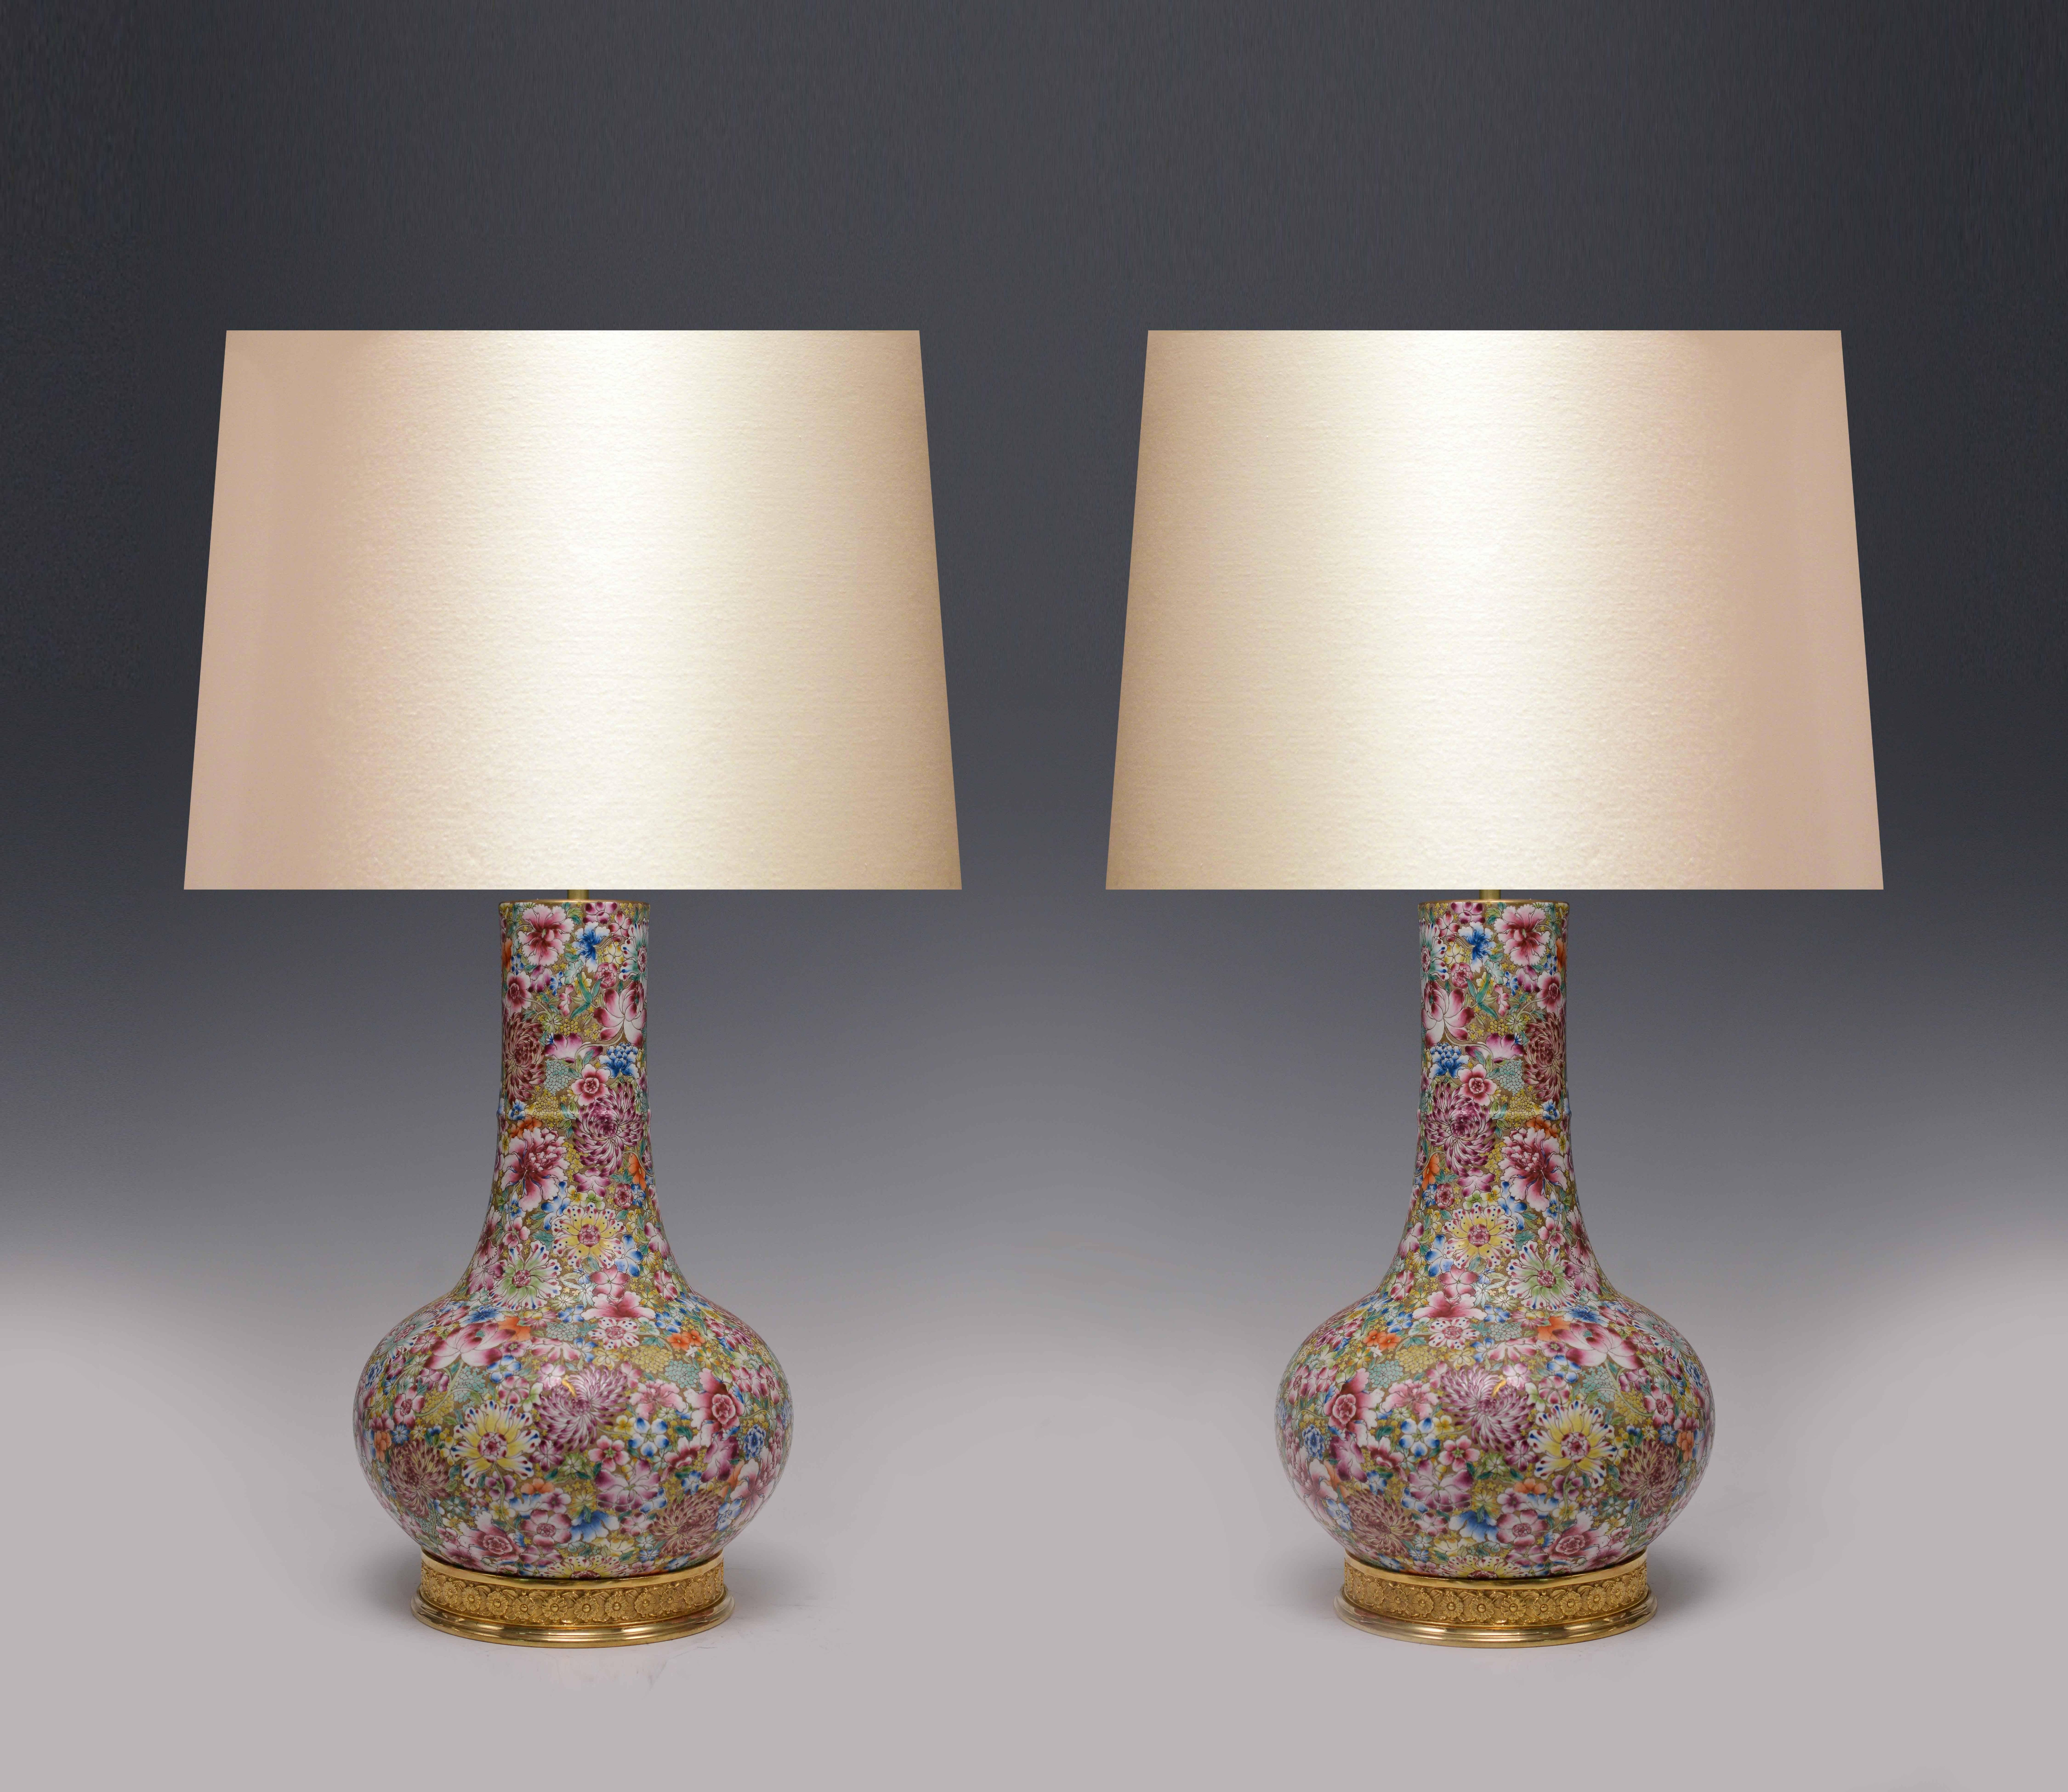 Famille rose 'mille fleurs' porcelain vases with gilt brass bases.
Measures to the top of porcelain: 17.5" H.
(Lampshade not included)